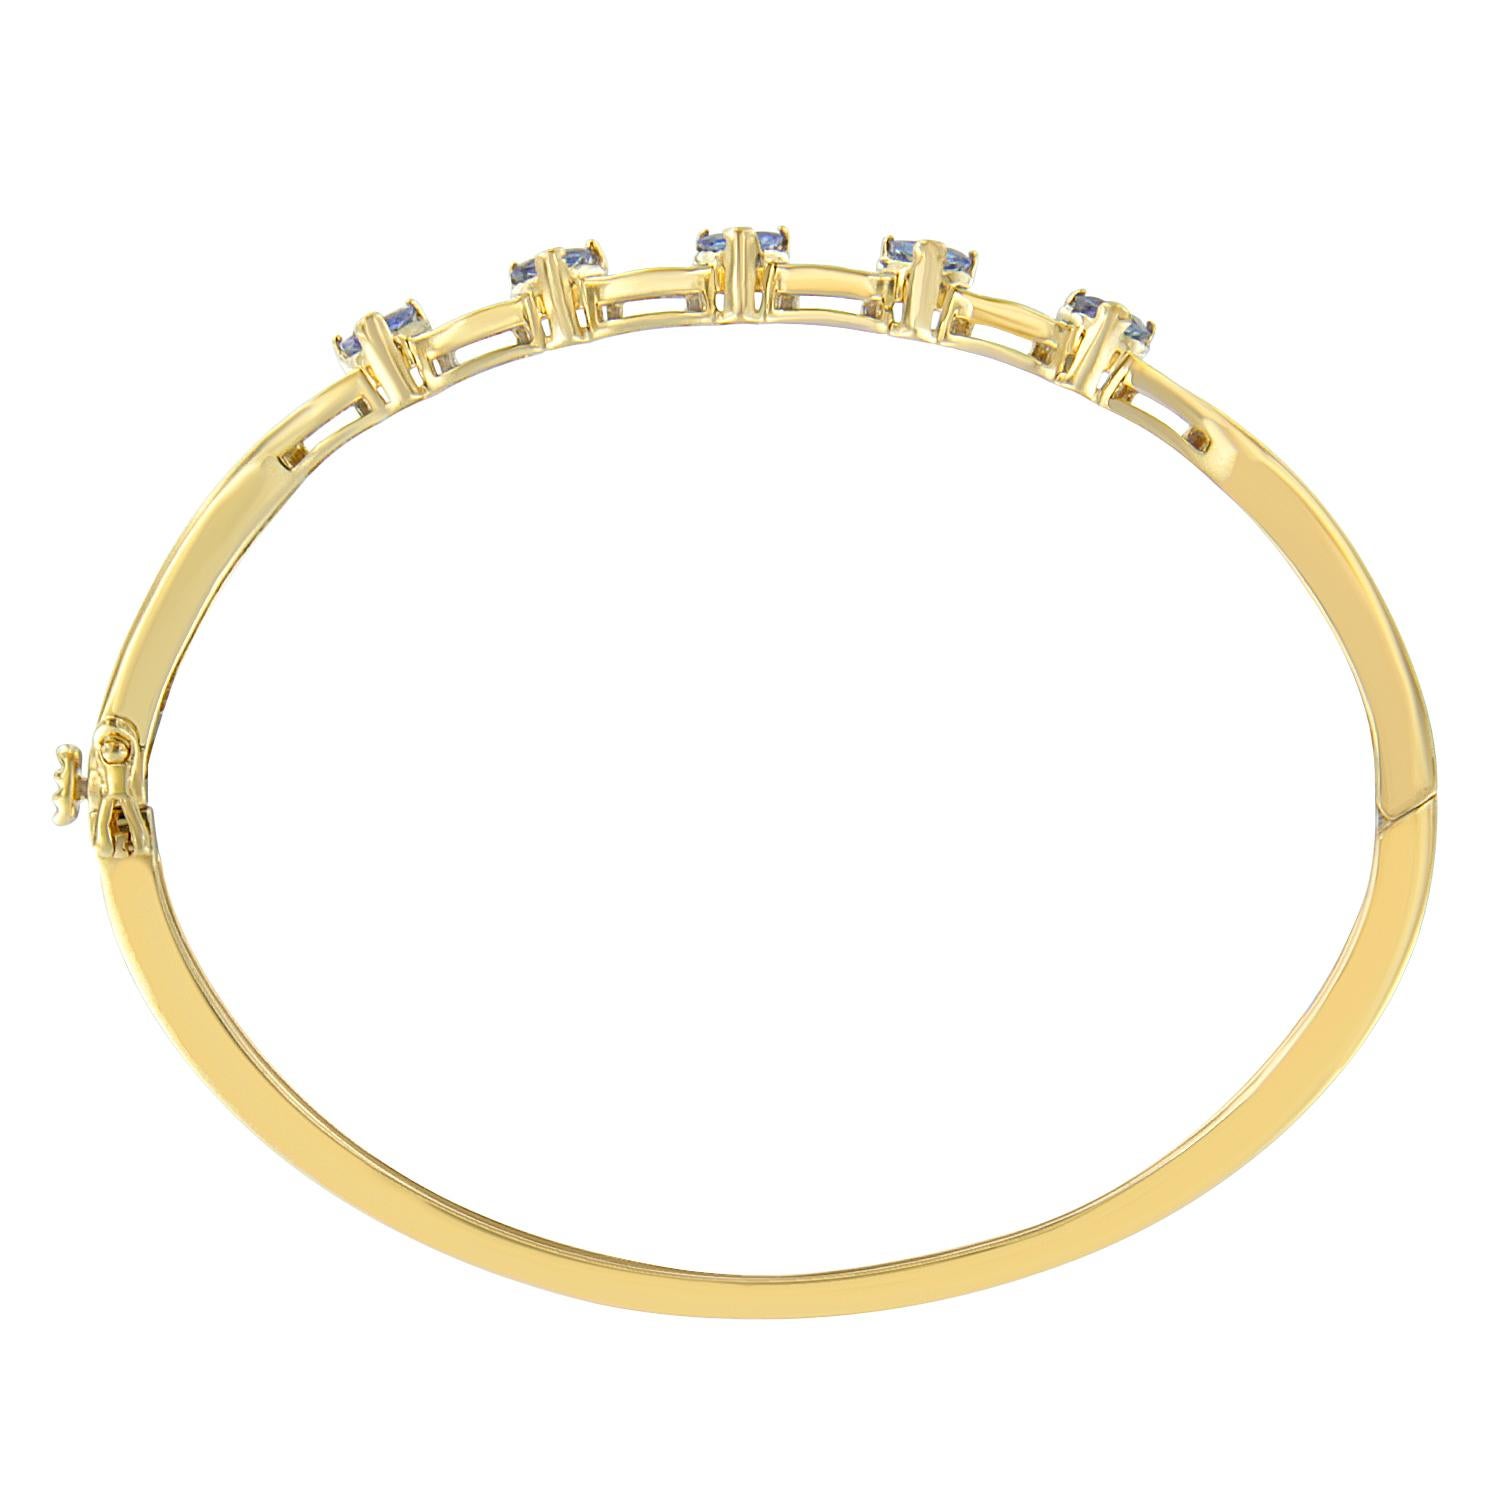 Make a bold statement with this stunning bangle, rendered in 14-karat yellow gold. The bangle sparkles brilliantly genuine tanzanite and baguette cut diamonds. Bracelet has 24 natural, baguette diamonds. Each stone weighs approximately 0.01 for a